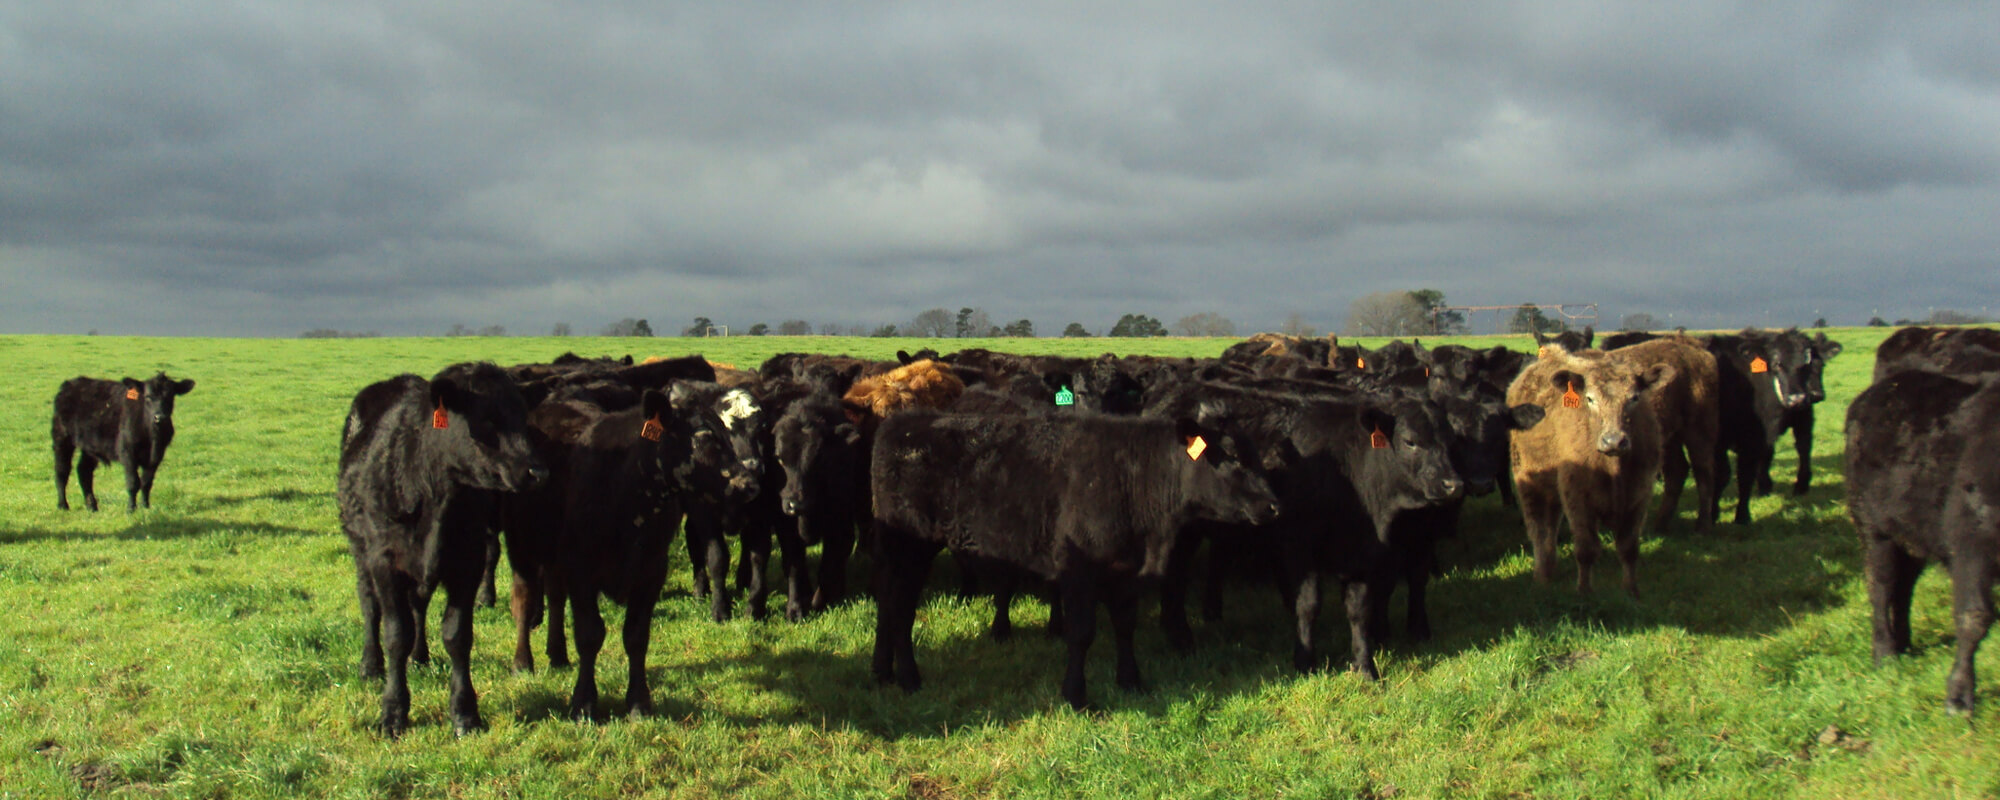 Cattle standing in pasture on a cloudy day